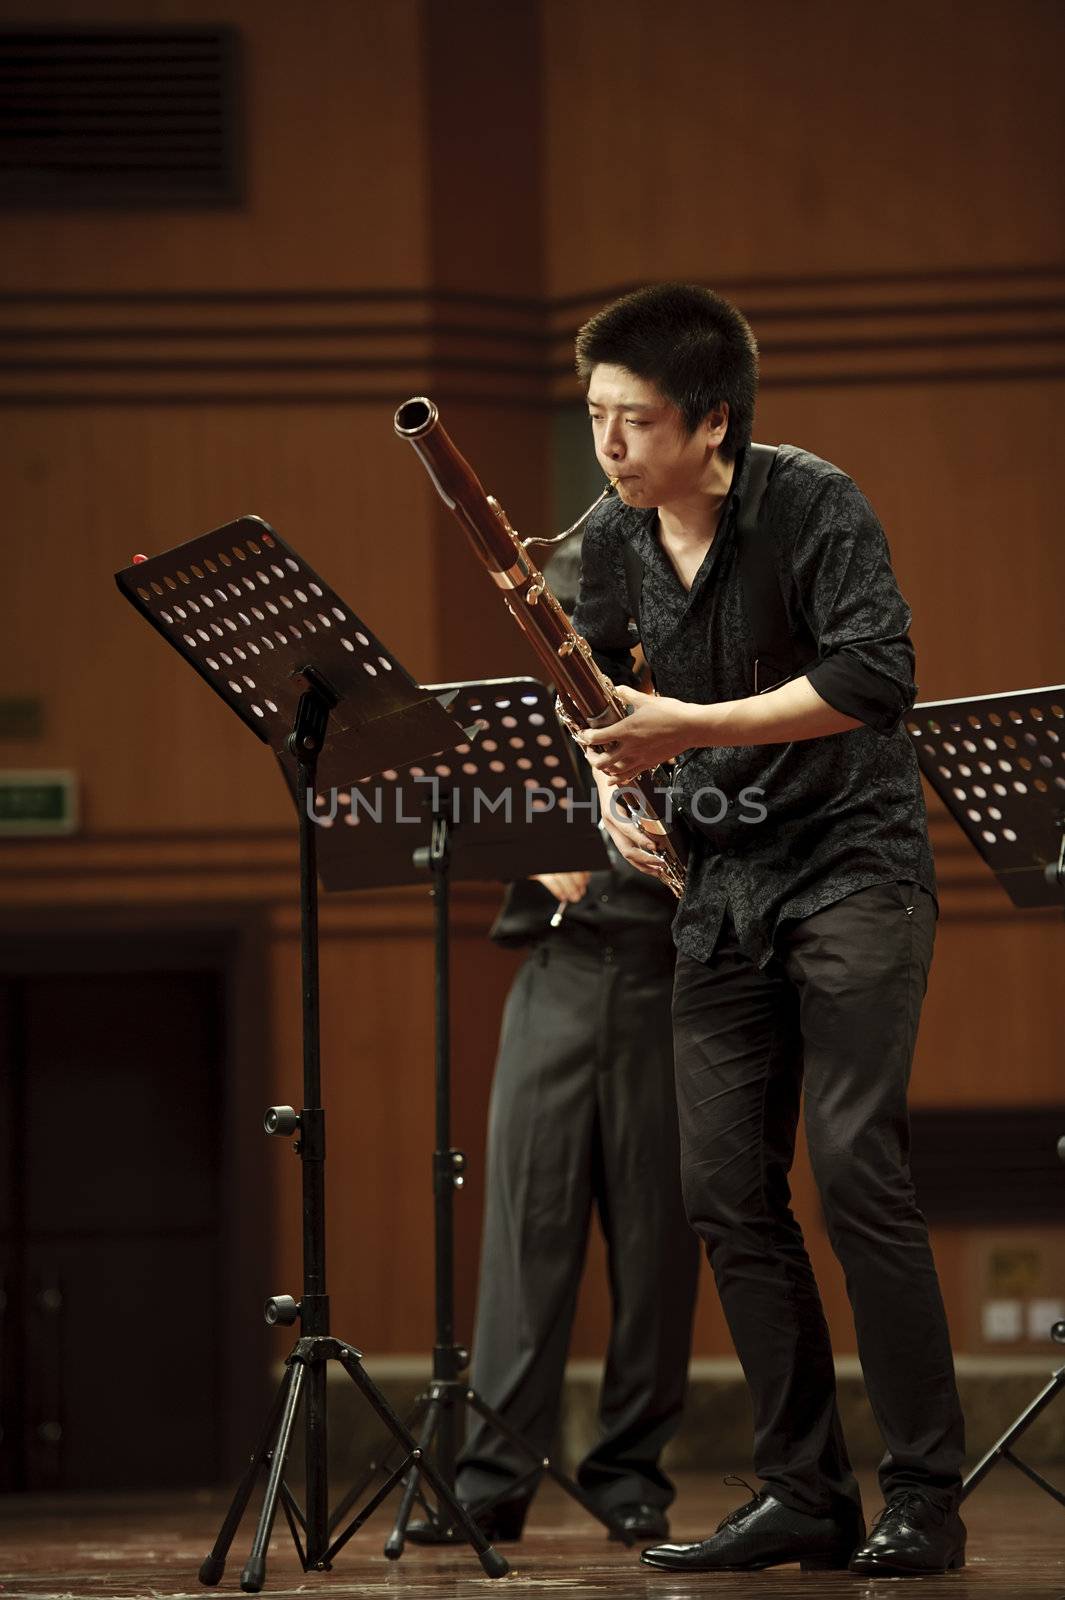 bassoonist on wind music chamber music concert by jackq